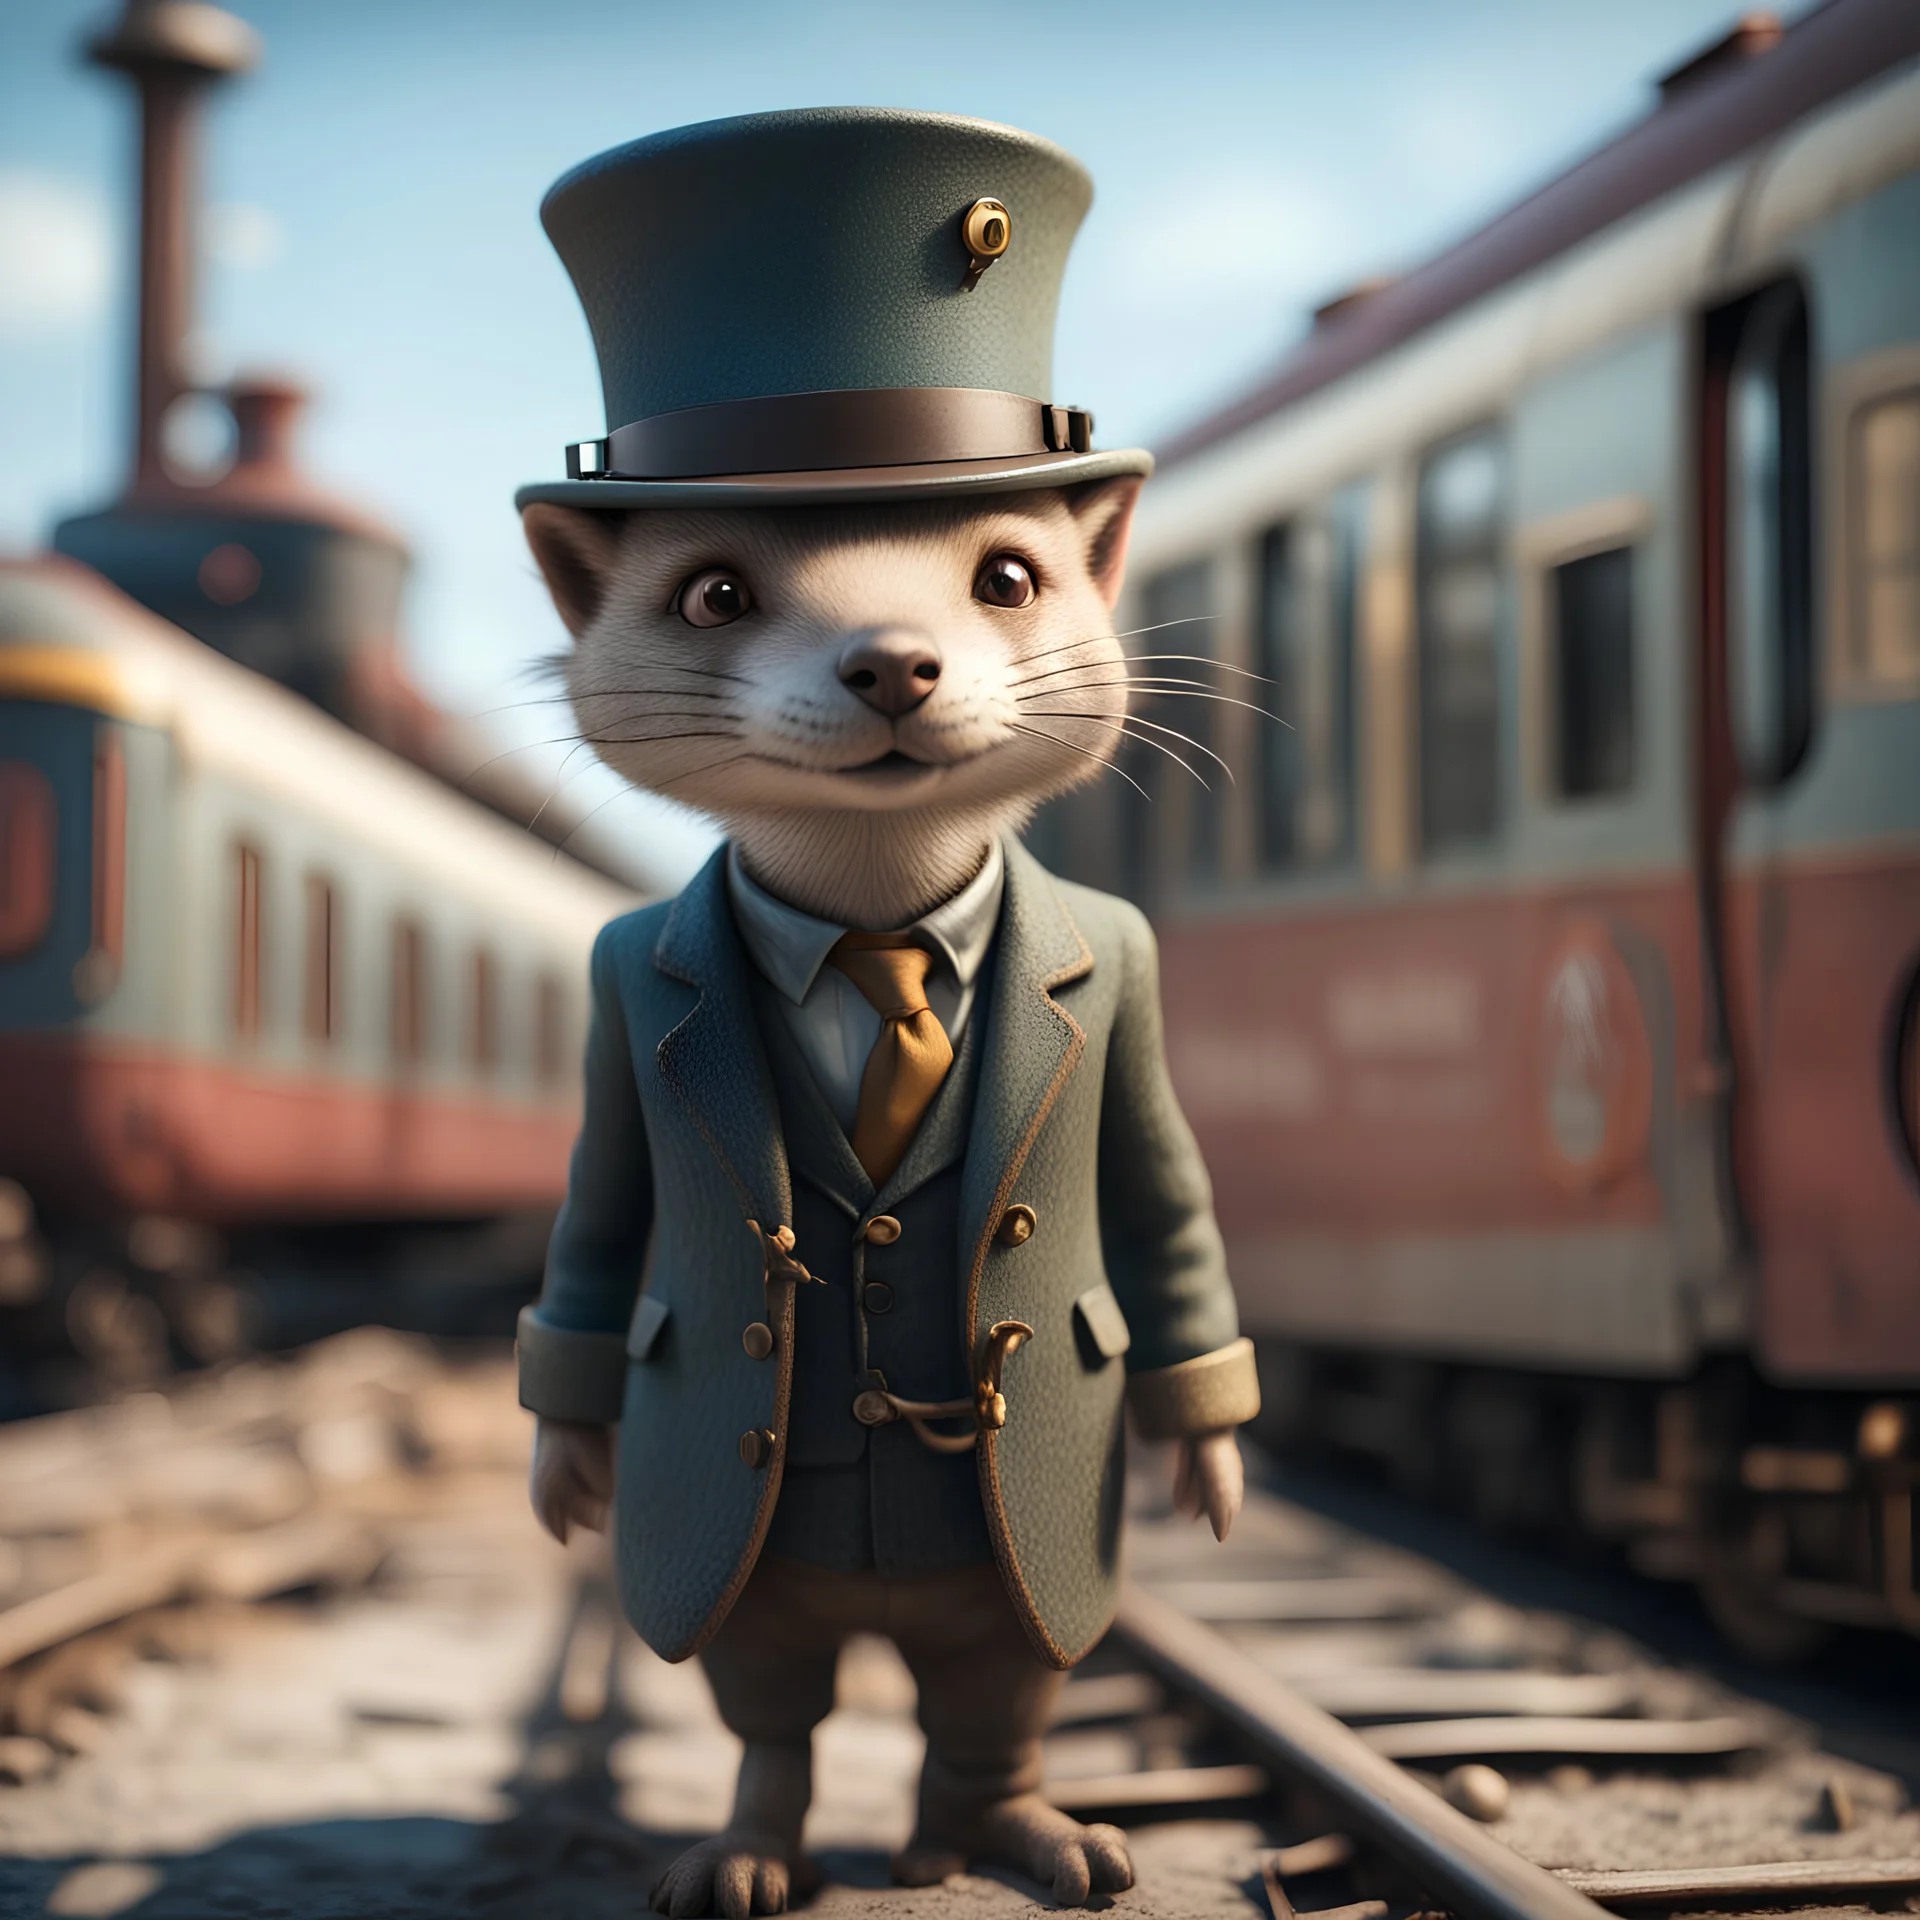 old train that looks like a weasel conductor wearing monocle, in the style of a fallout 4,bokeh like f/0.8, tilt-shift lens 8k, high detail, smooth render, down-light, unreal engine, prize winning